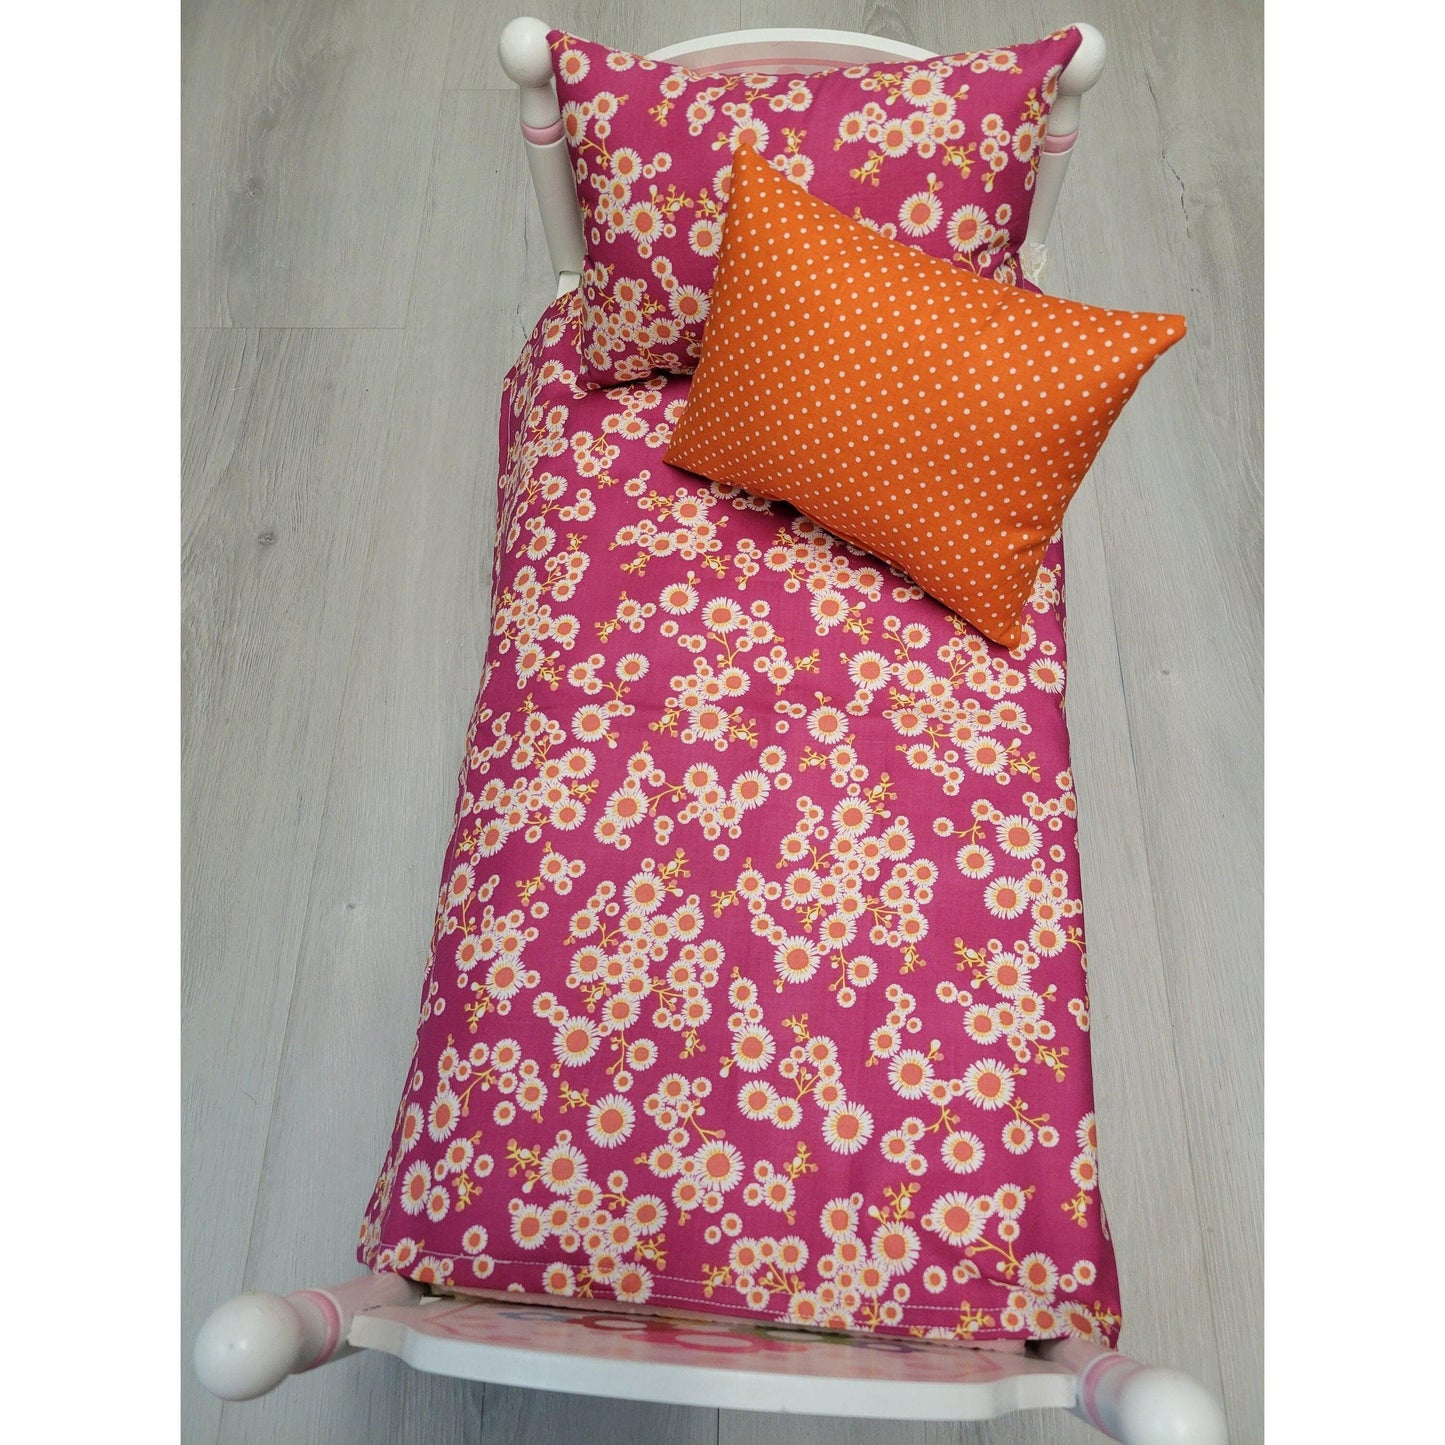 Bedding Set for dolls, 18 in doll bedding set, Dark Pink and Orange Bedding set for 18 in doll such as the American Girl doll.